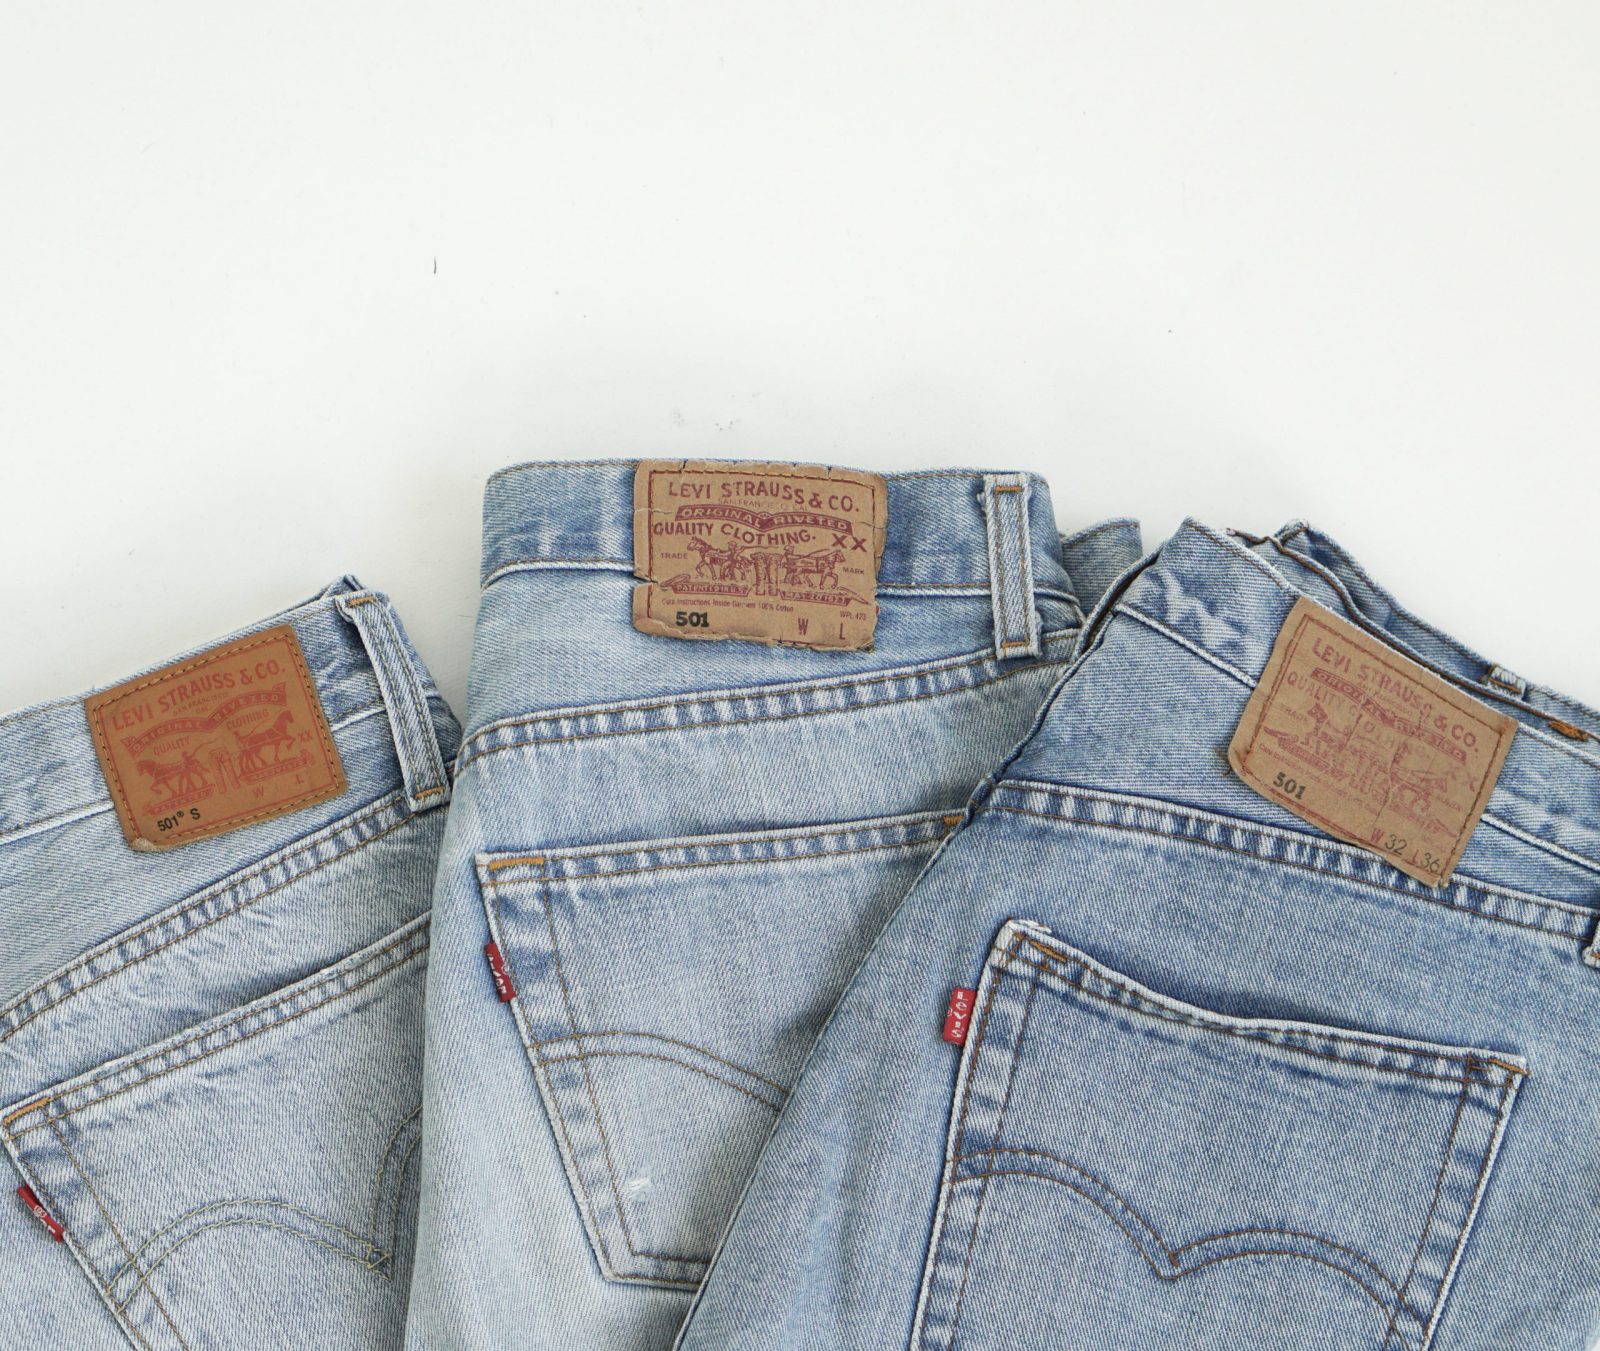 My Levi’s jeans guide.